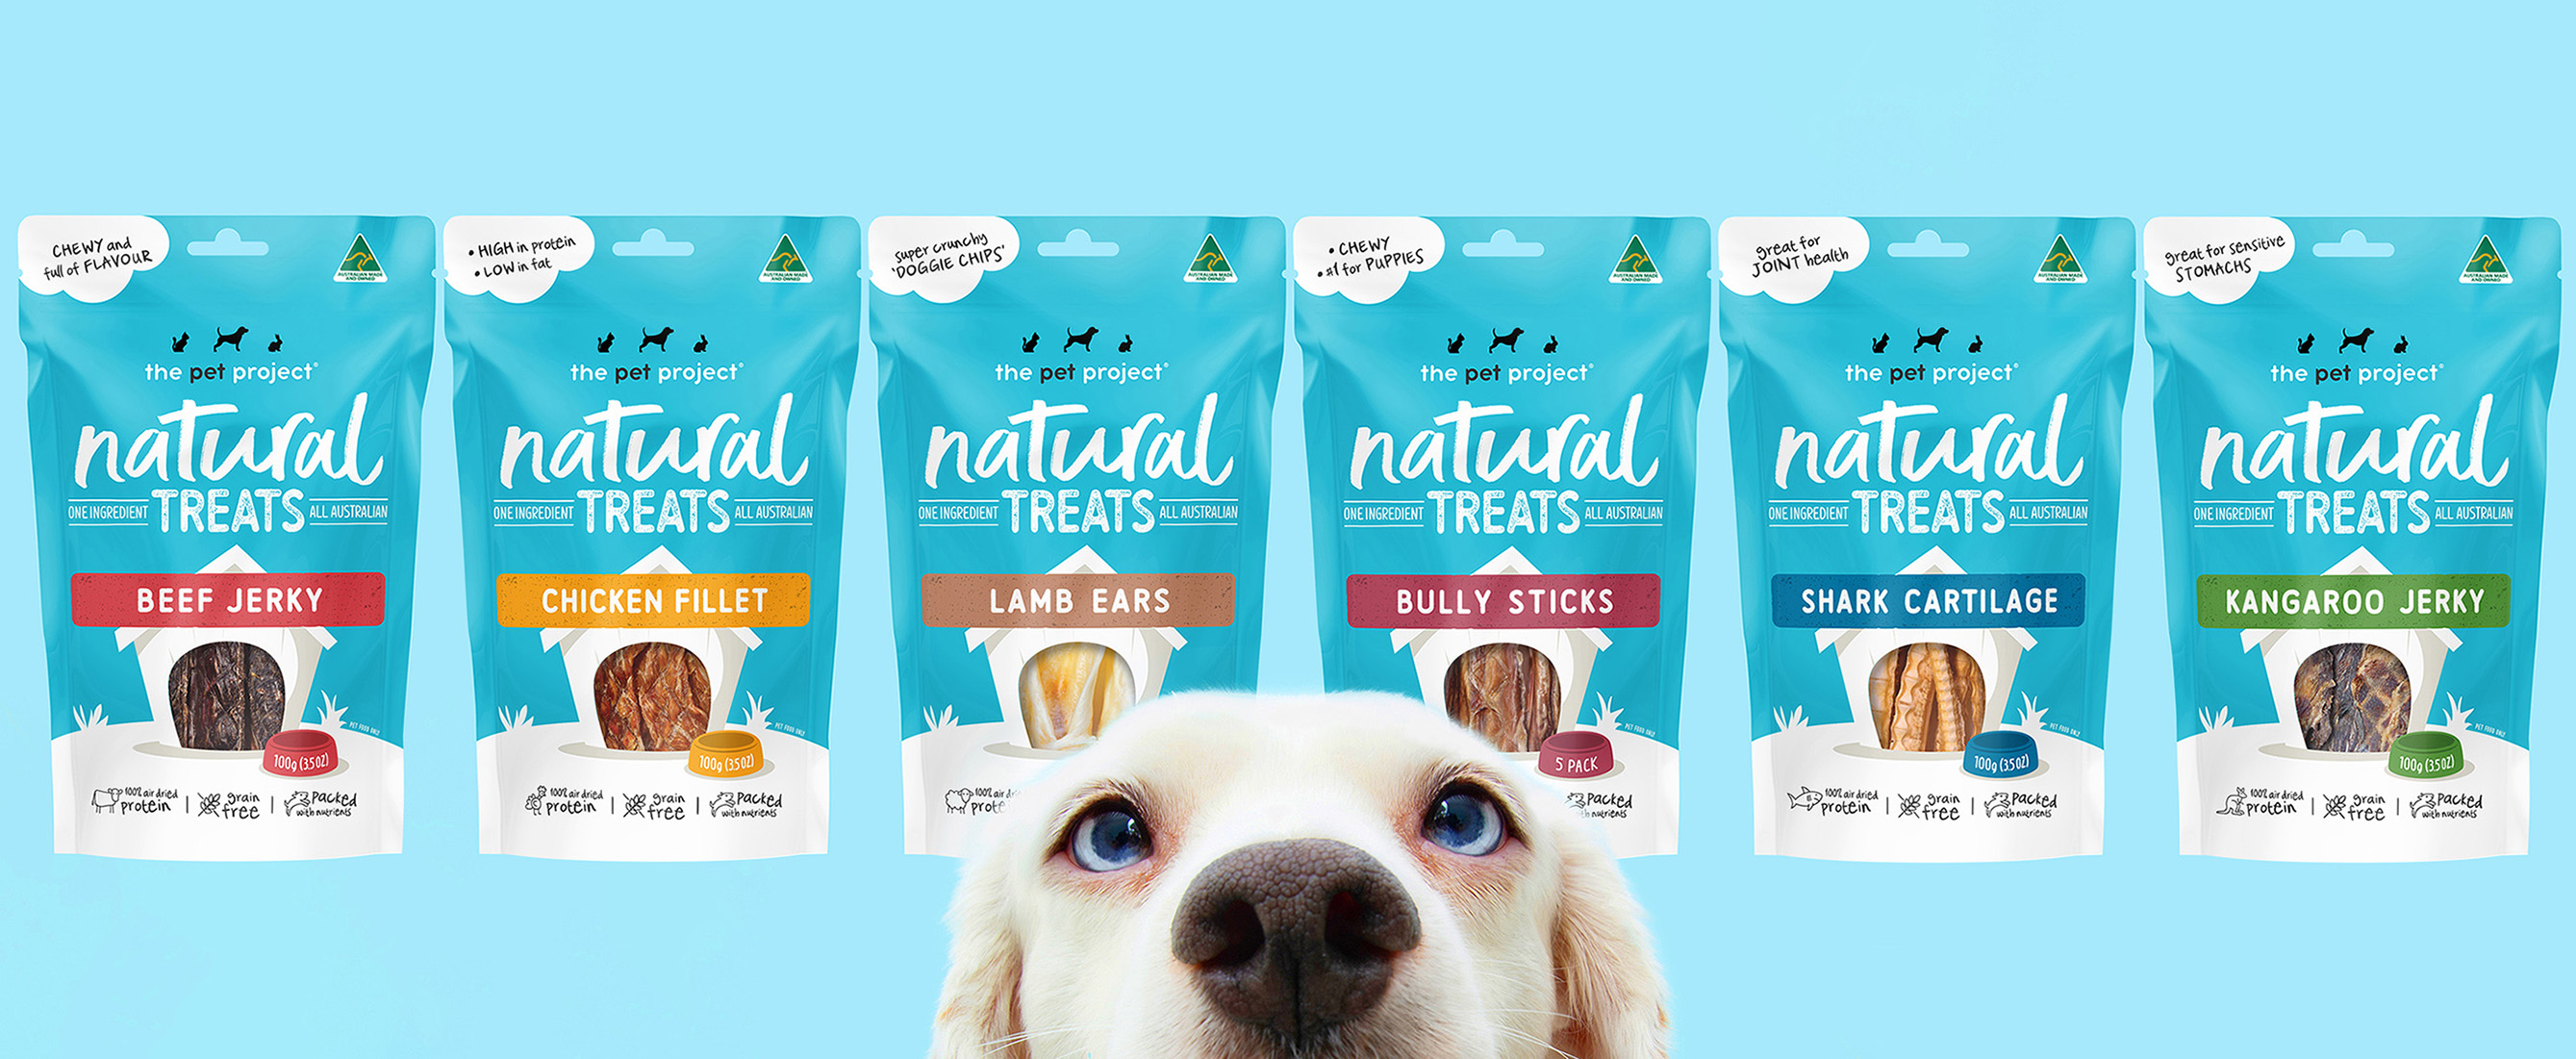 The Pet Project Natural Treats Branding and Packaging Design